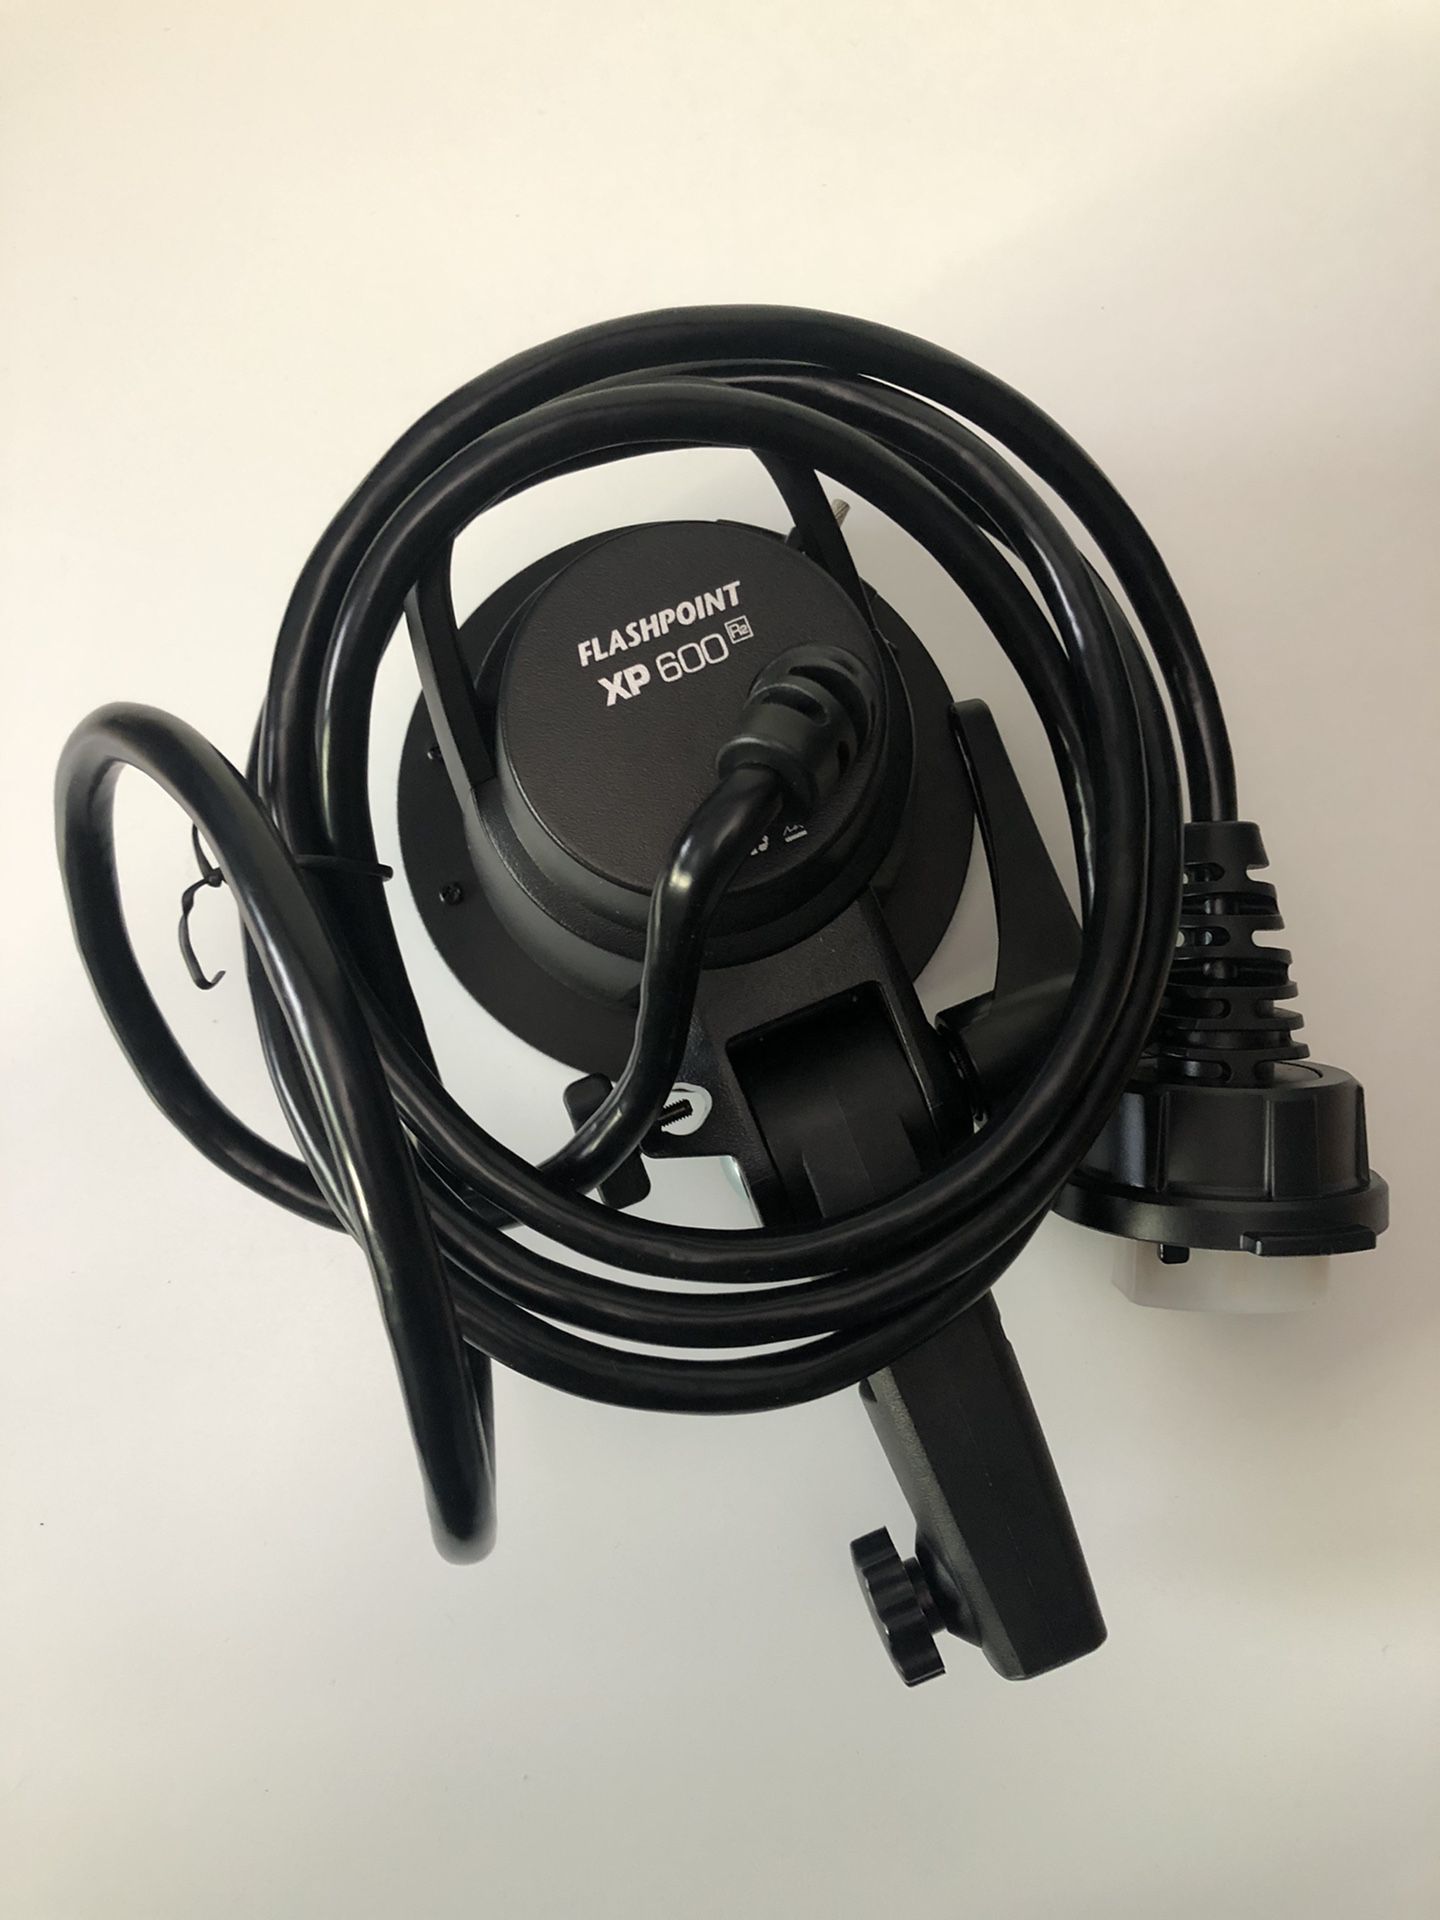 Flashpoint portable 600ws extension